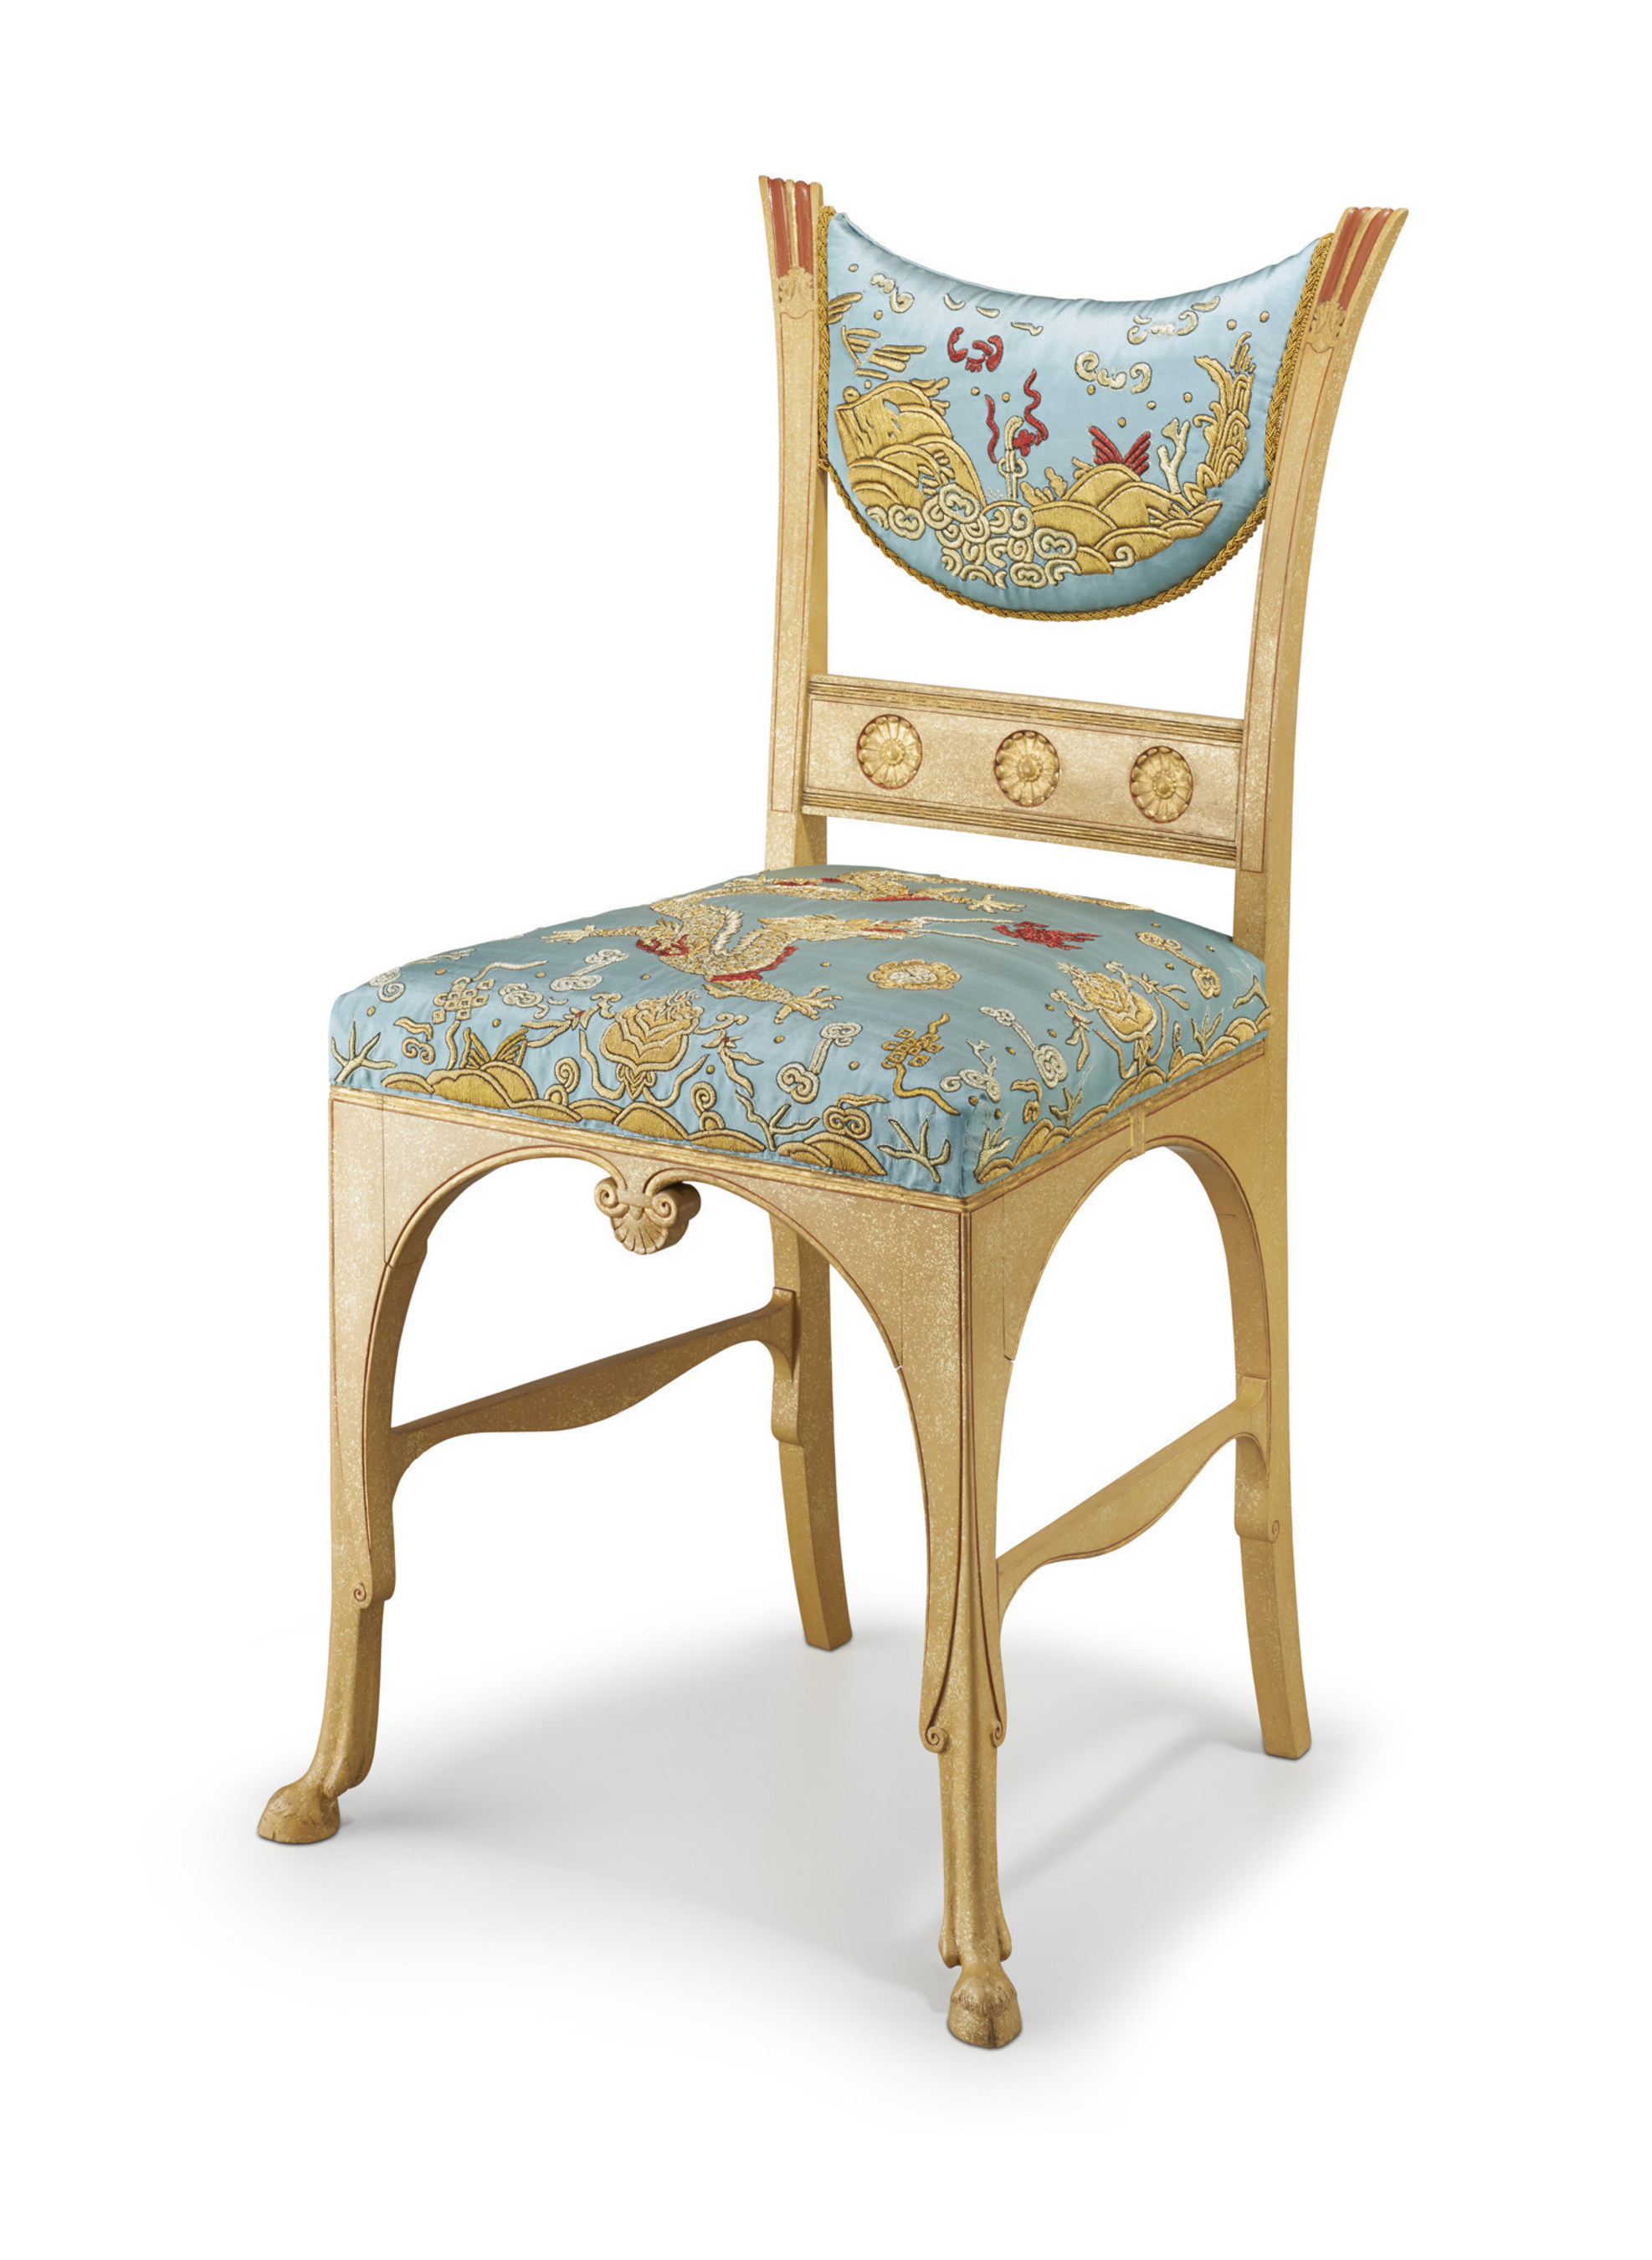 Associated Artists, LLC. "Pompeian" side chair. Herter Brothers. New York c. 1880. Painted and gilt-flecked maple with upholstered seats. Probably commissioned for J. Piermont Morgan's lavish Madison Avenue mansion.